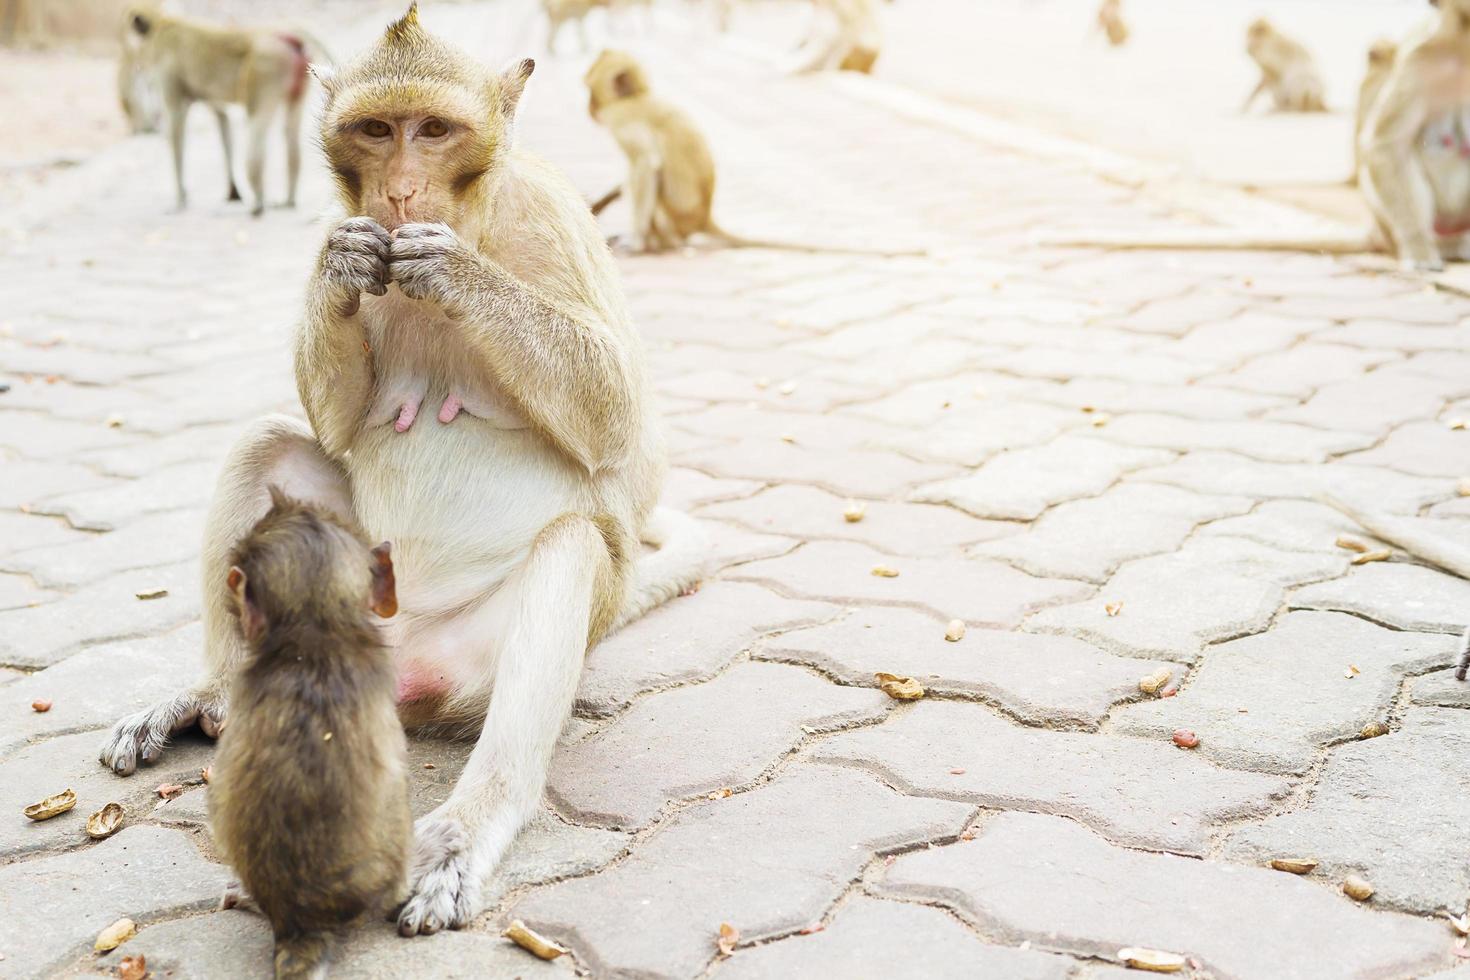 Mother Monkey is eating nuts photo